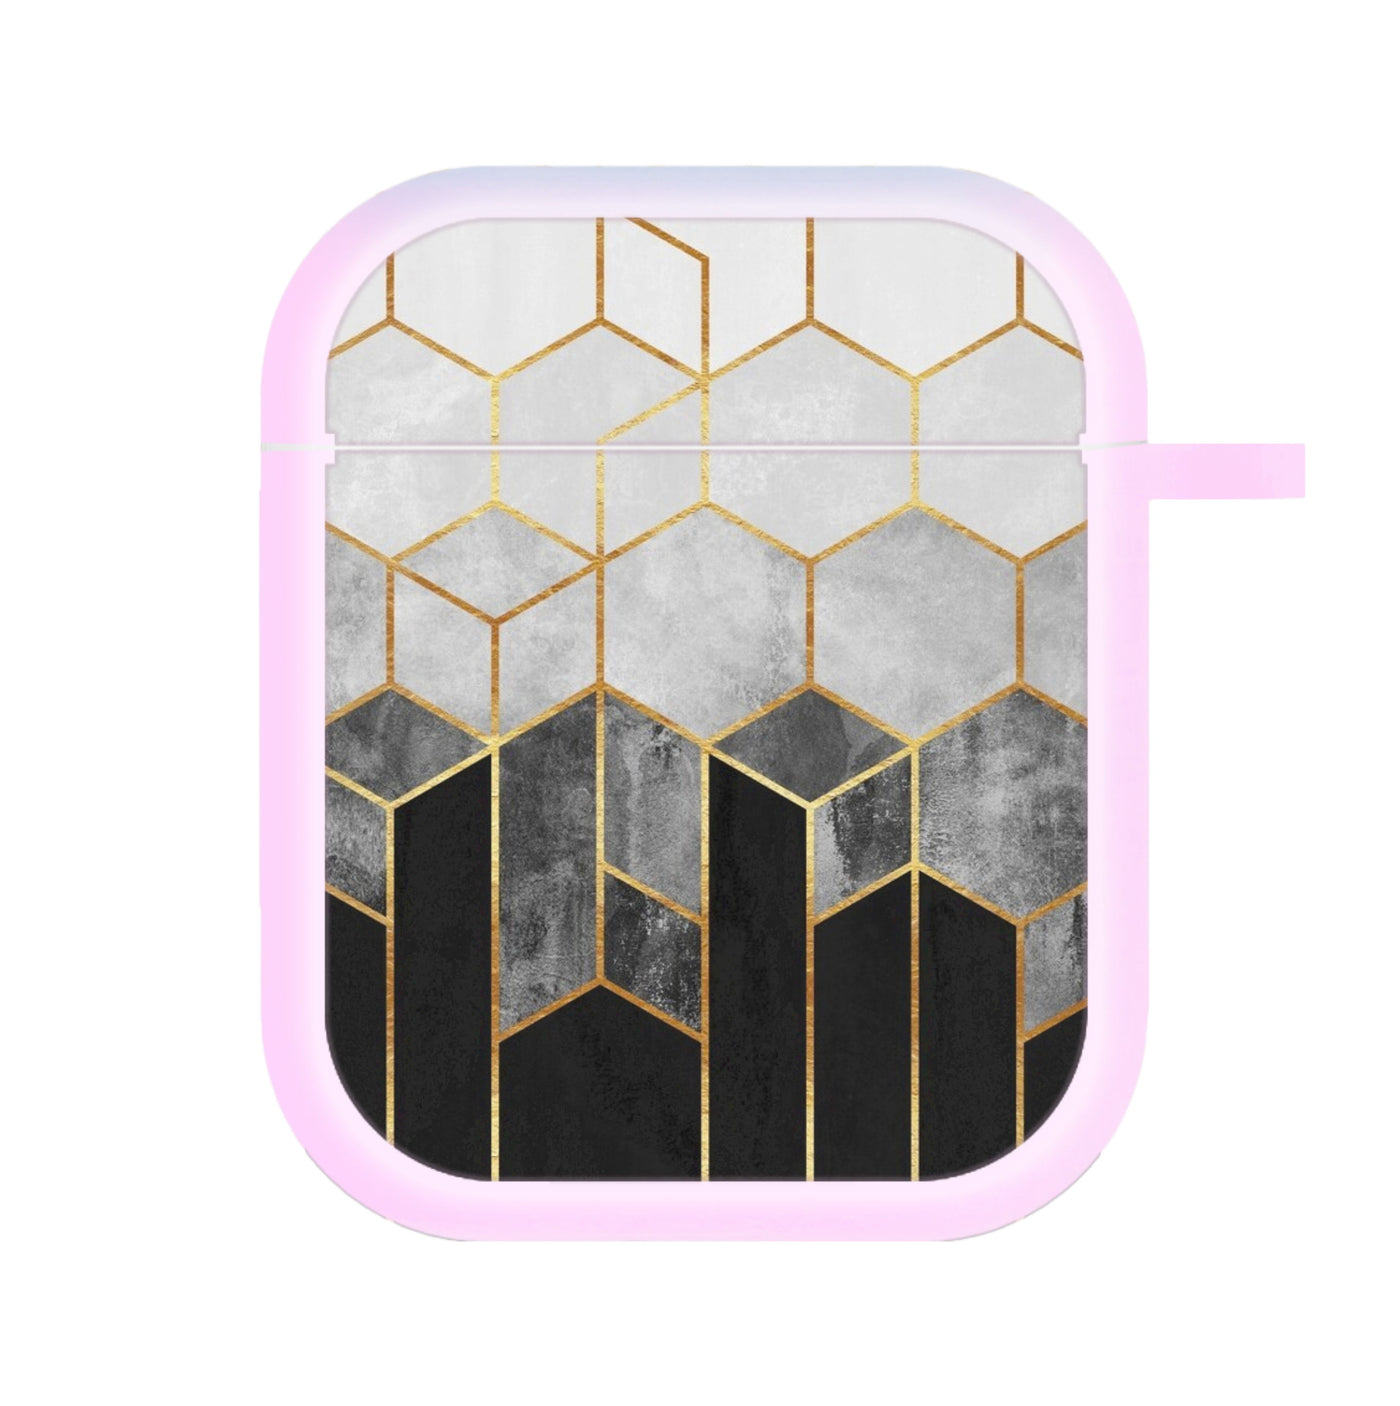 Black White & Gold Honeycomb Pattern AirPods Case